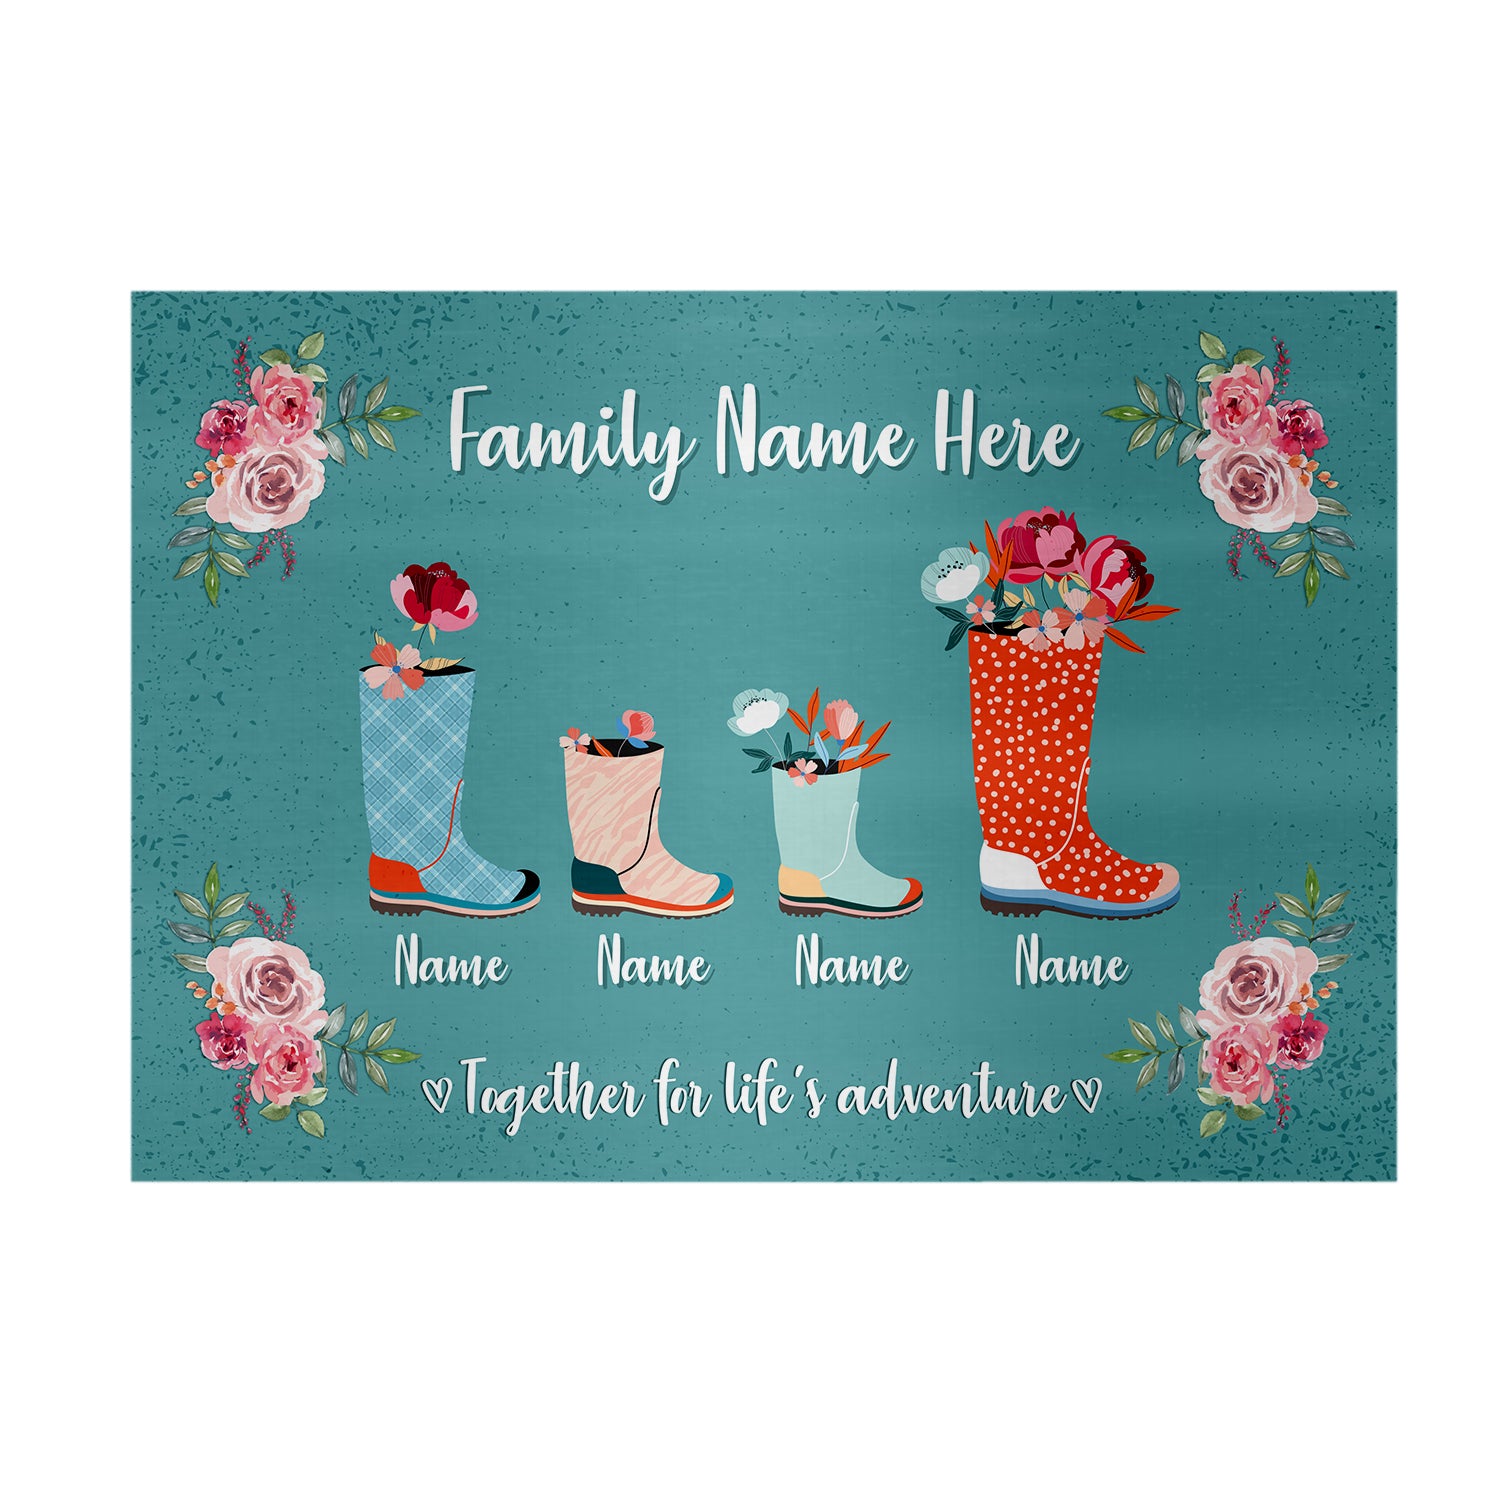 Personalised Family of 4 Wellies - A4 Metal Sign Plaque